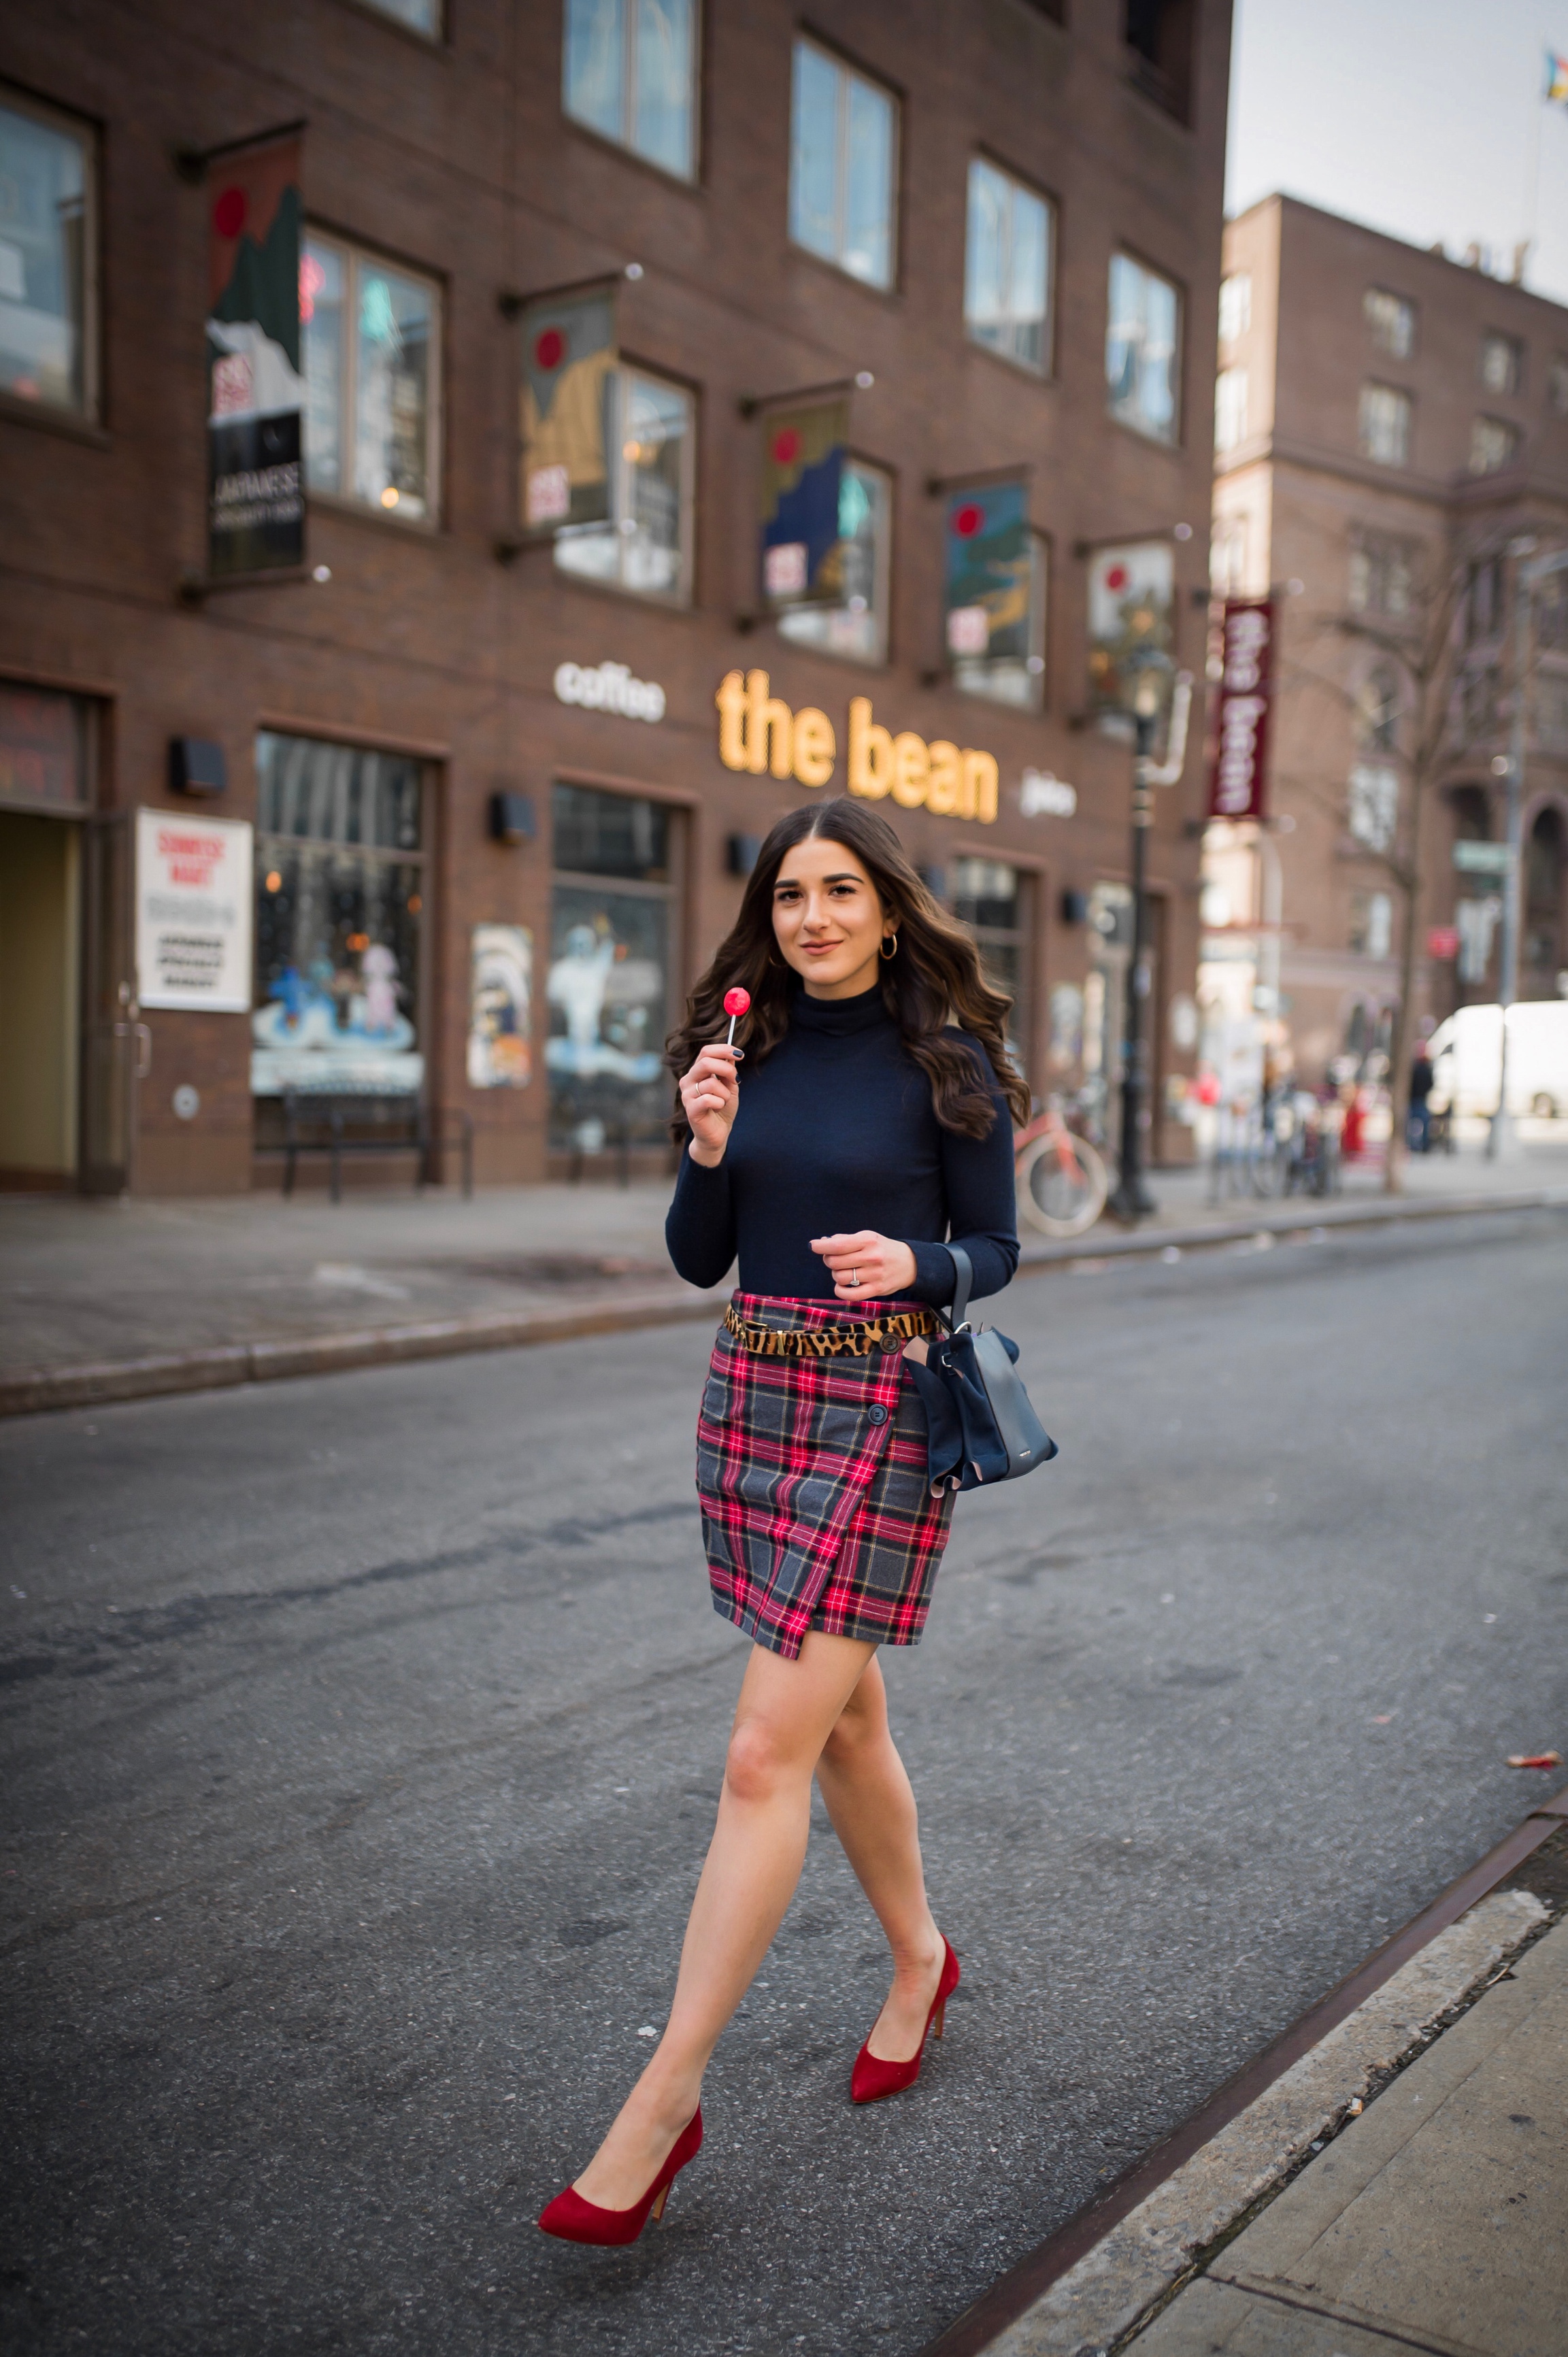 How NYFW Changed From My 1st To 12th Season Plaid Skirt Red Heels Esther Santer Fashion Blog NYC Street Style Blogger Outfit OOTD Trendy Shopping Navy Turtleneck Hair Goals Wear Winter Fall Shop Jcrew H&M Banana Republic Leopard Belt Accessories Bag.jpg